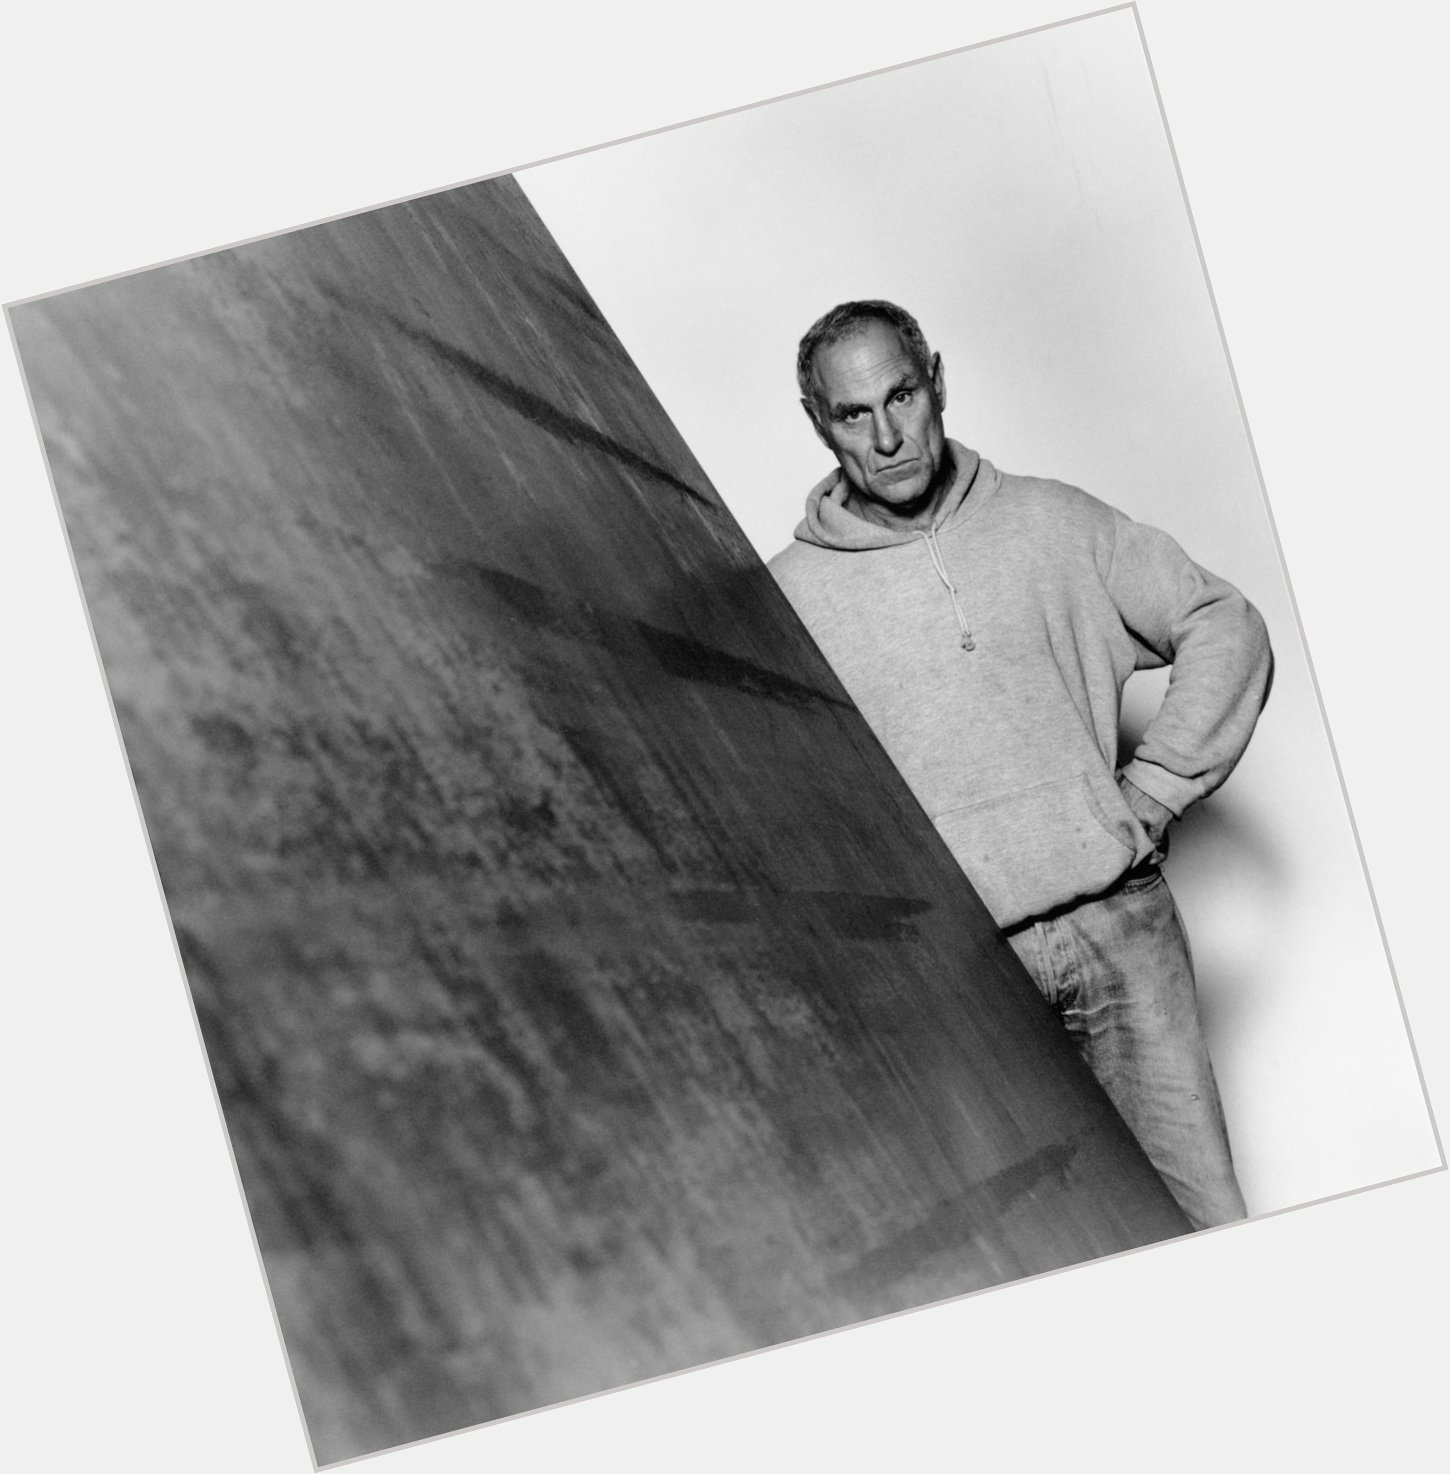 \"Work out of your work. Don\t work out of anybody else\s work.\" 

Happy 76th birthday Richard Serra! 